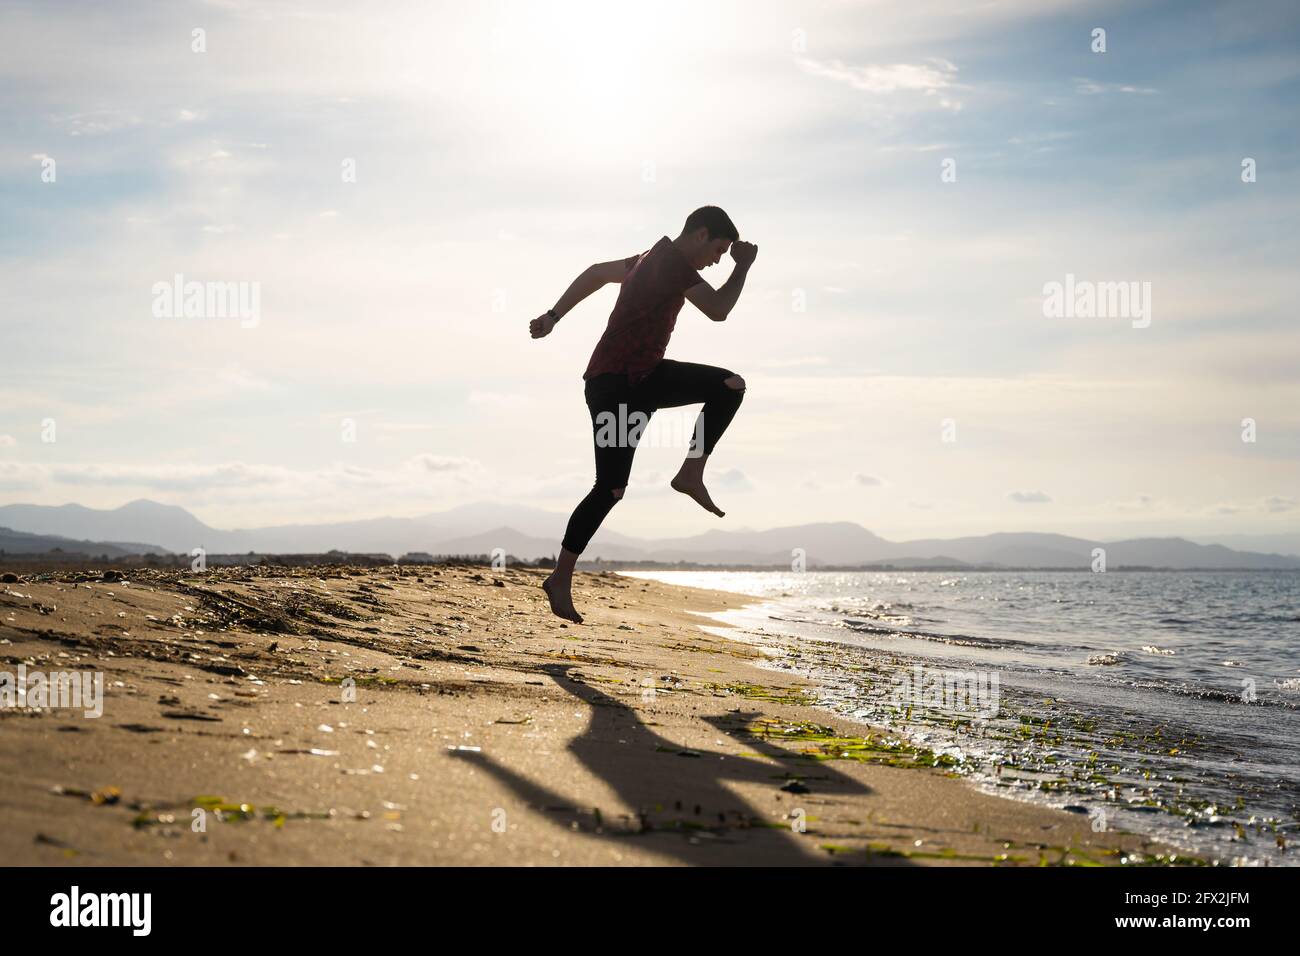 Man jumping on the seashore on a sunny day. Caucasian with long trousers and short-sleeved shirt. Shadow can be seen on the golden sand. Stock Photo